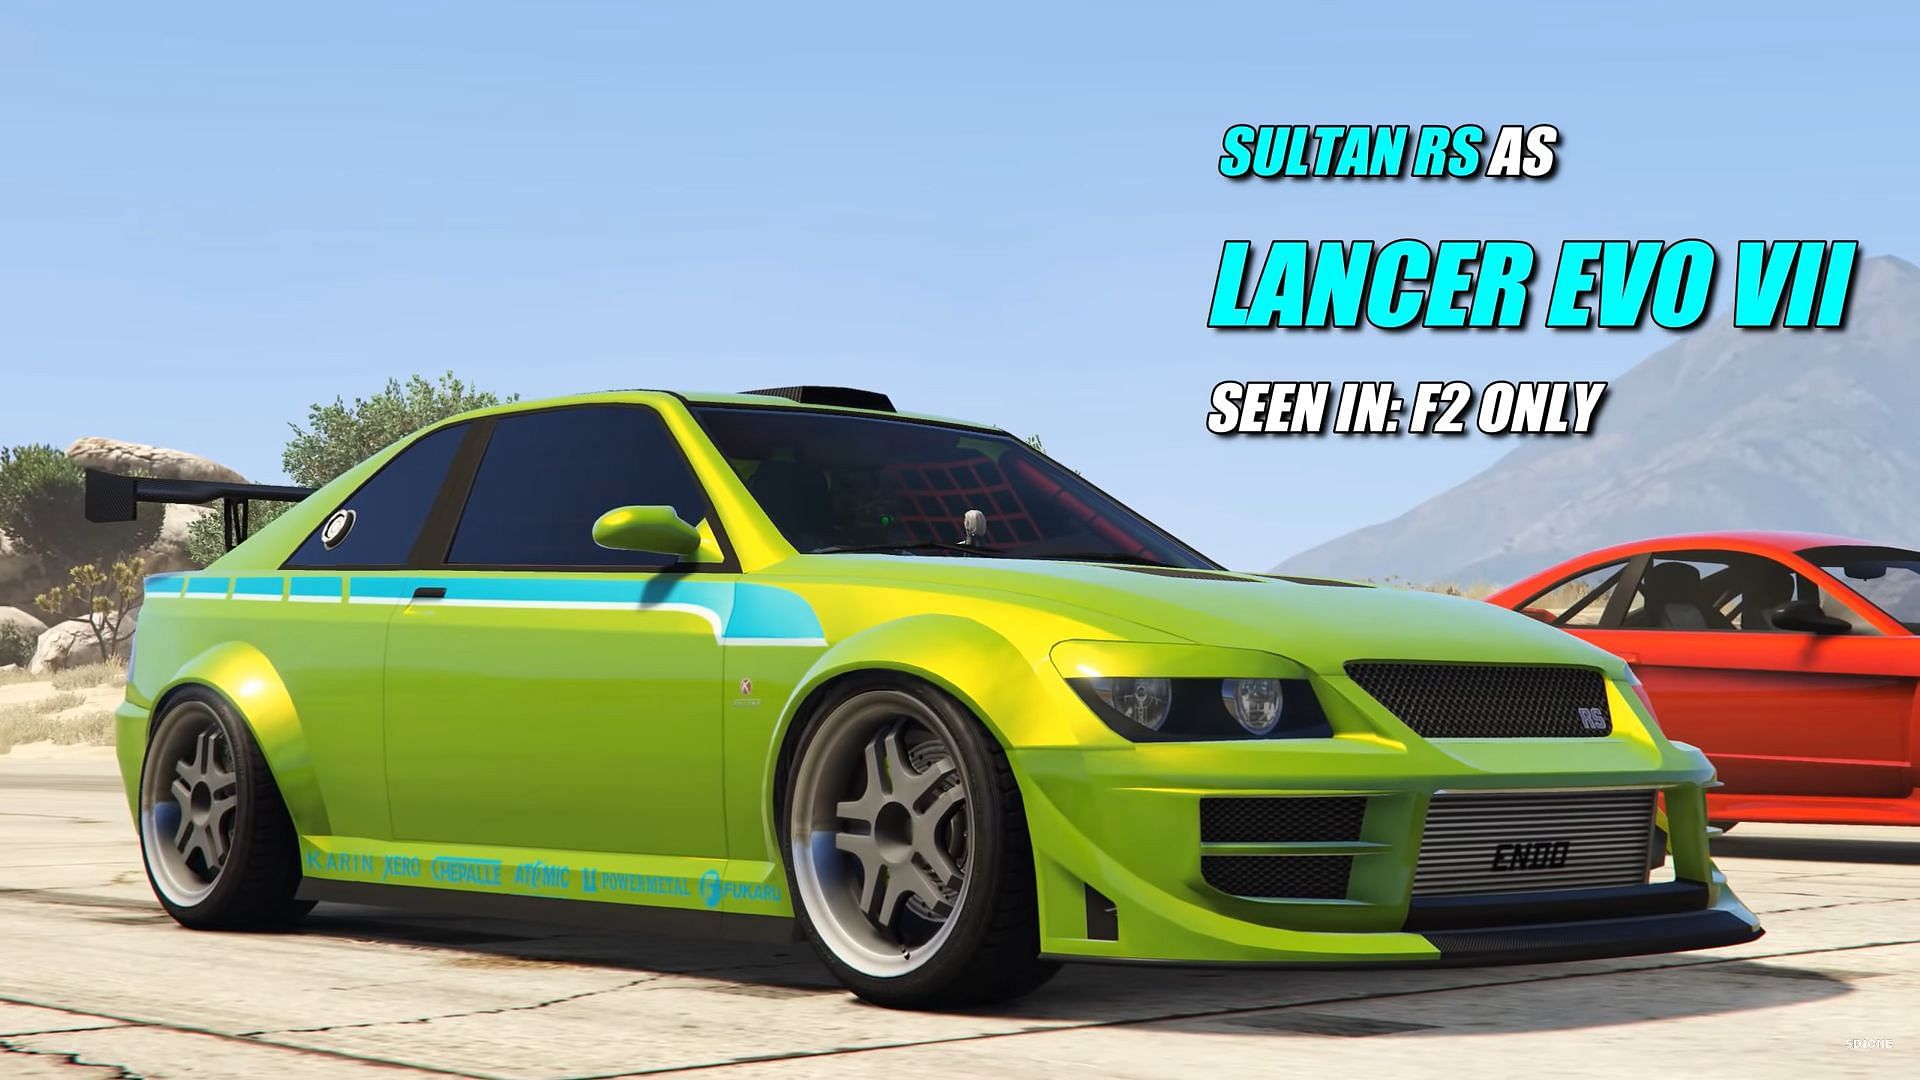 A screenshot from the video showing the Lancer Evo VII build (Image via SD1ONE)